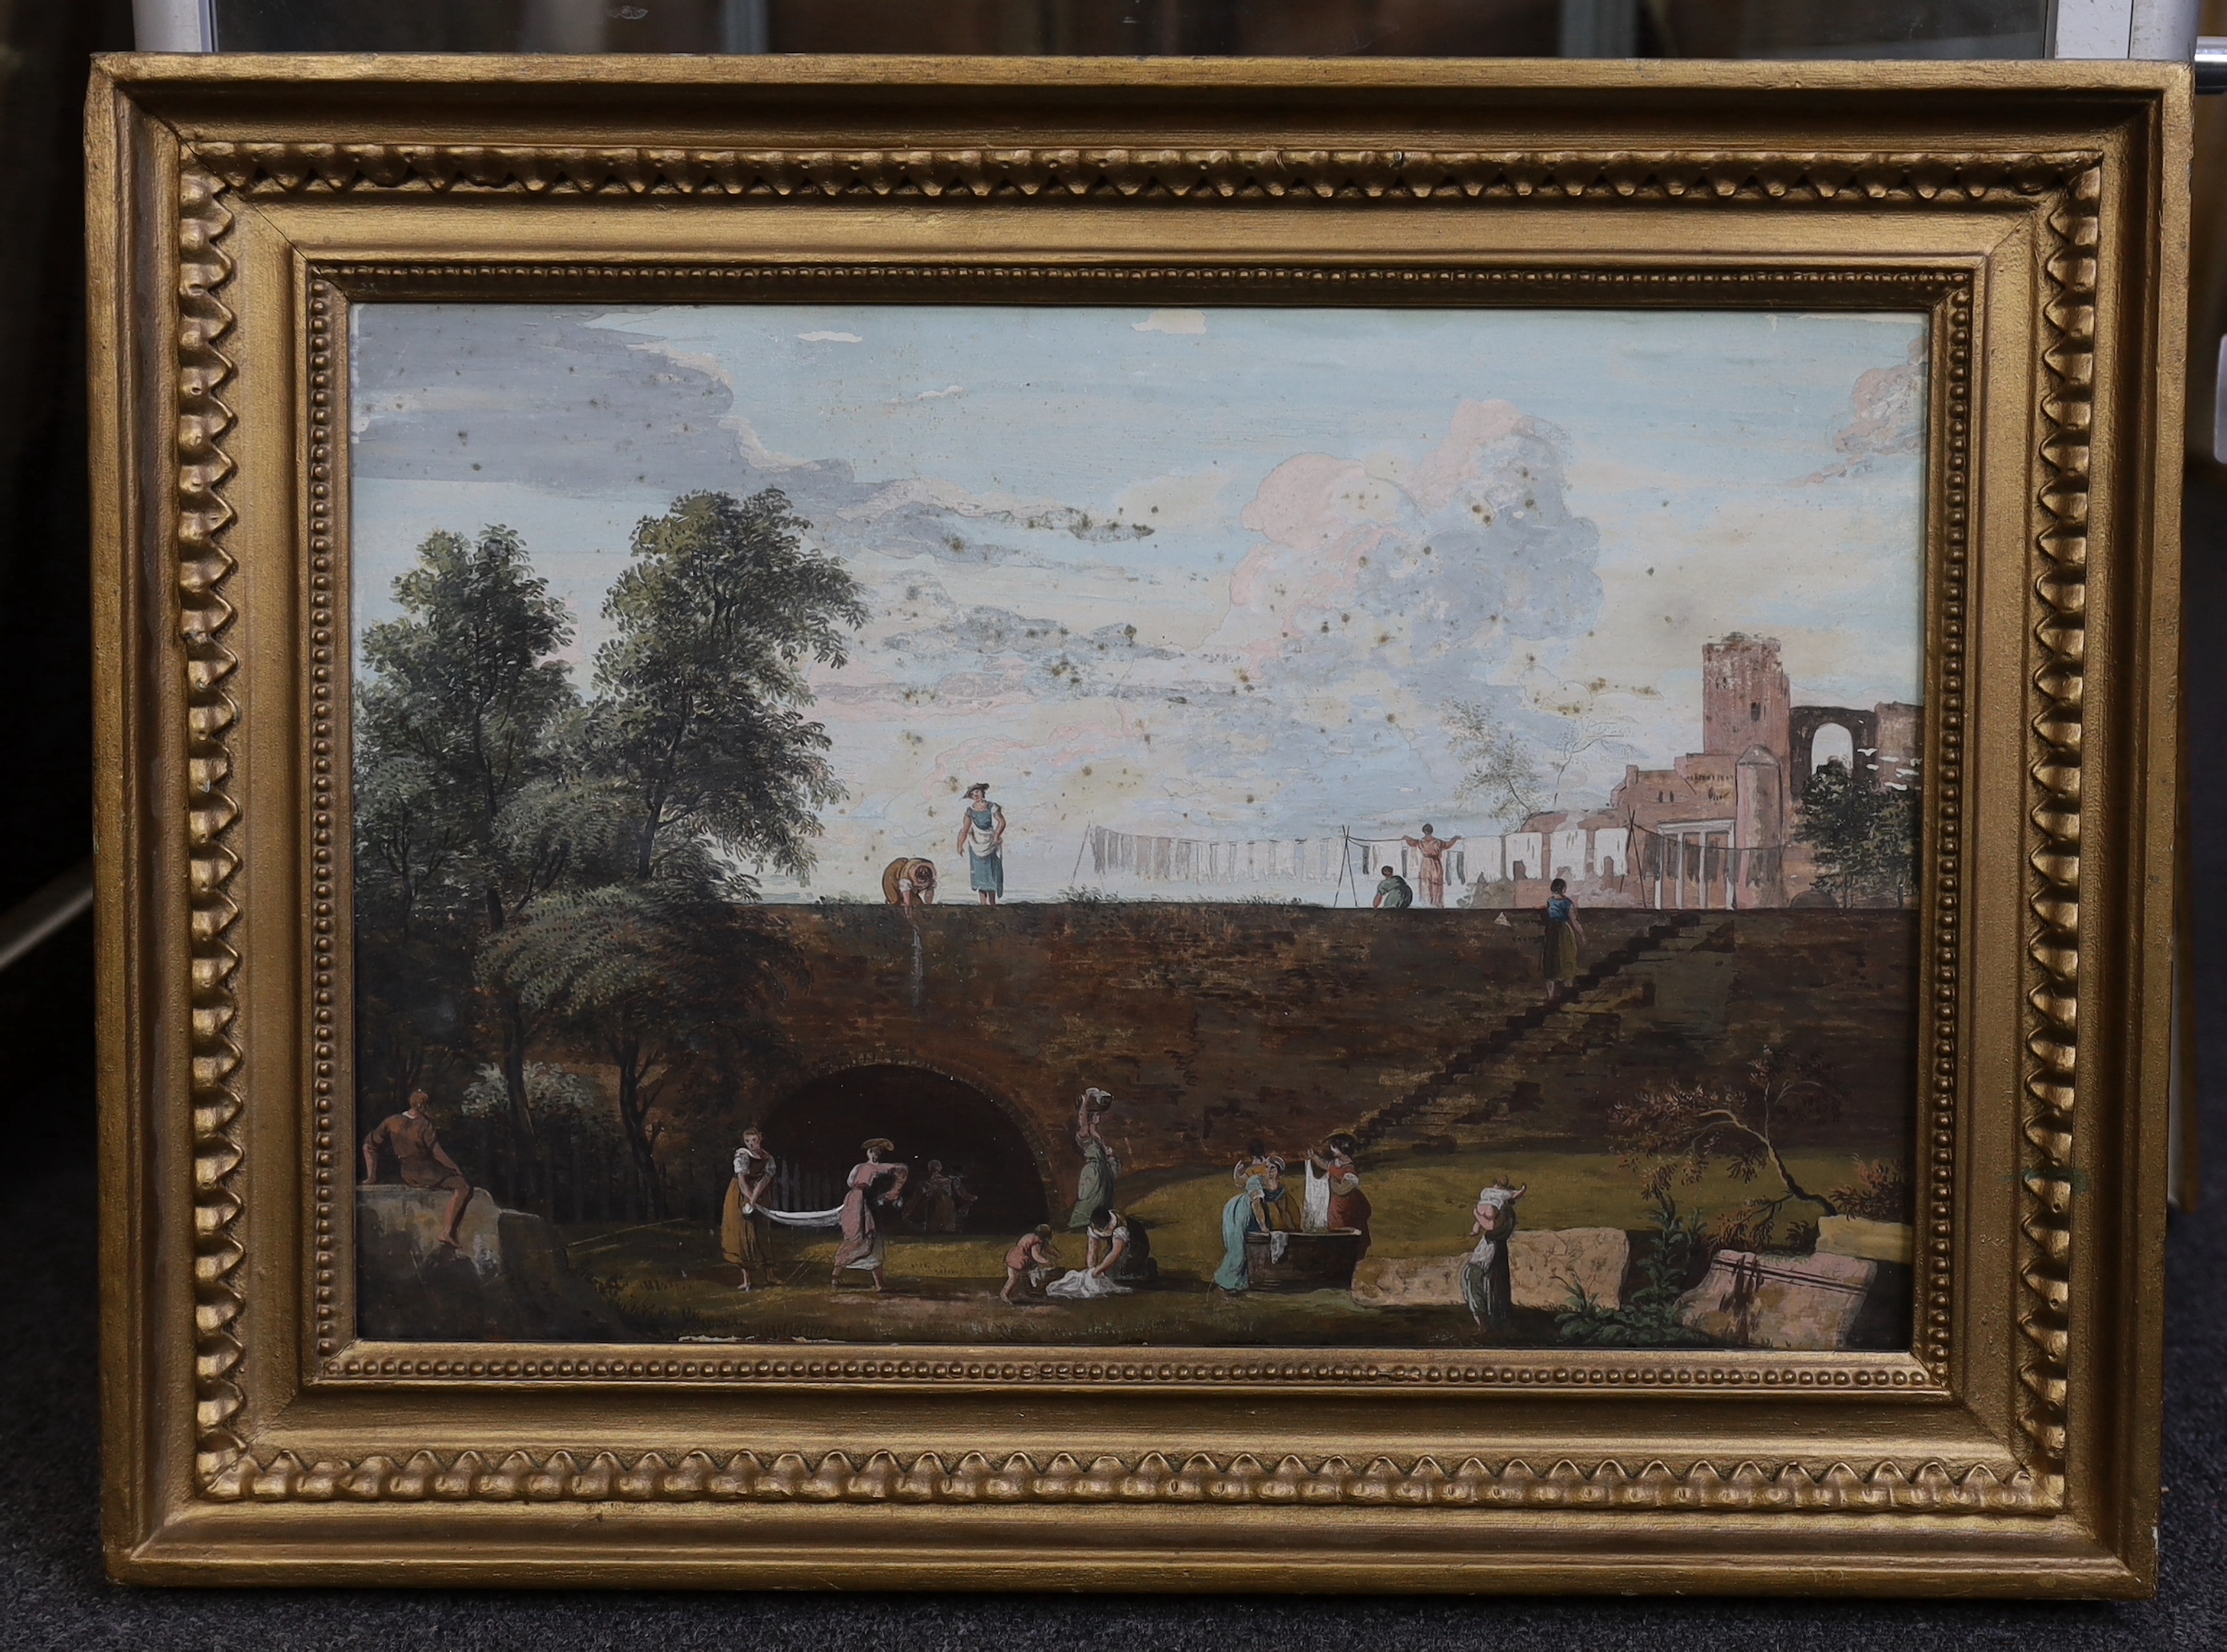 Attributed to Marco Ricci (Italian, 1676-1729), Outskirts of a town with women washing linen, tempera on panel, 30 x 45cm